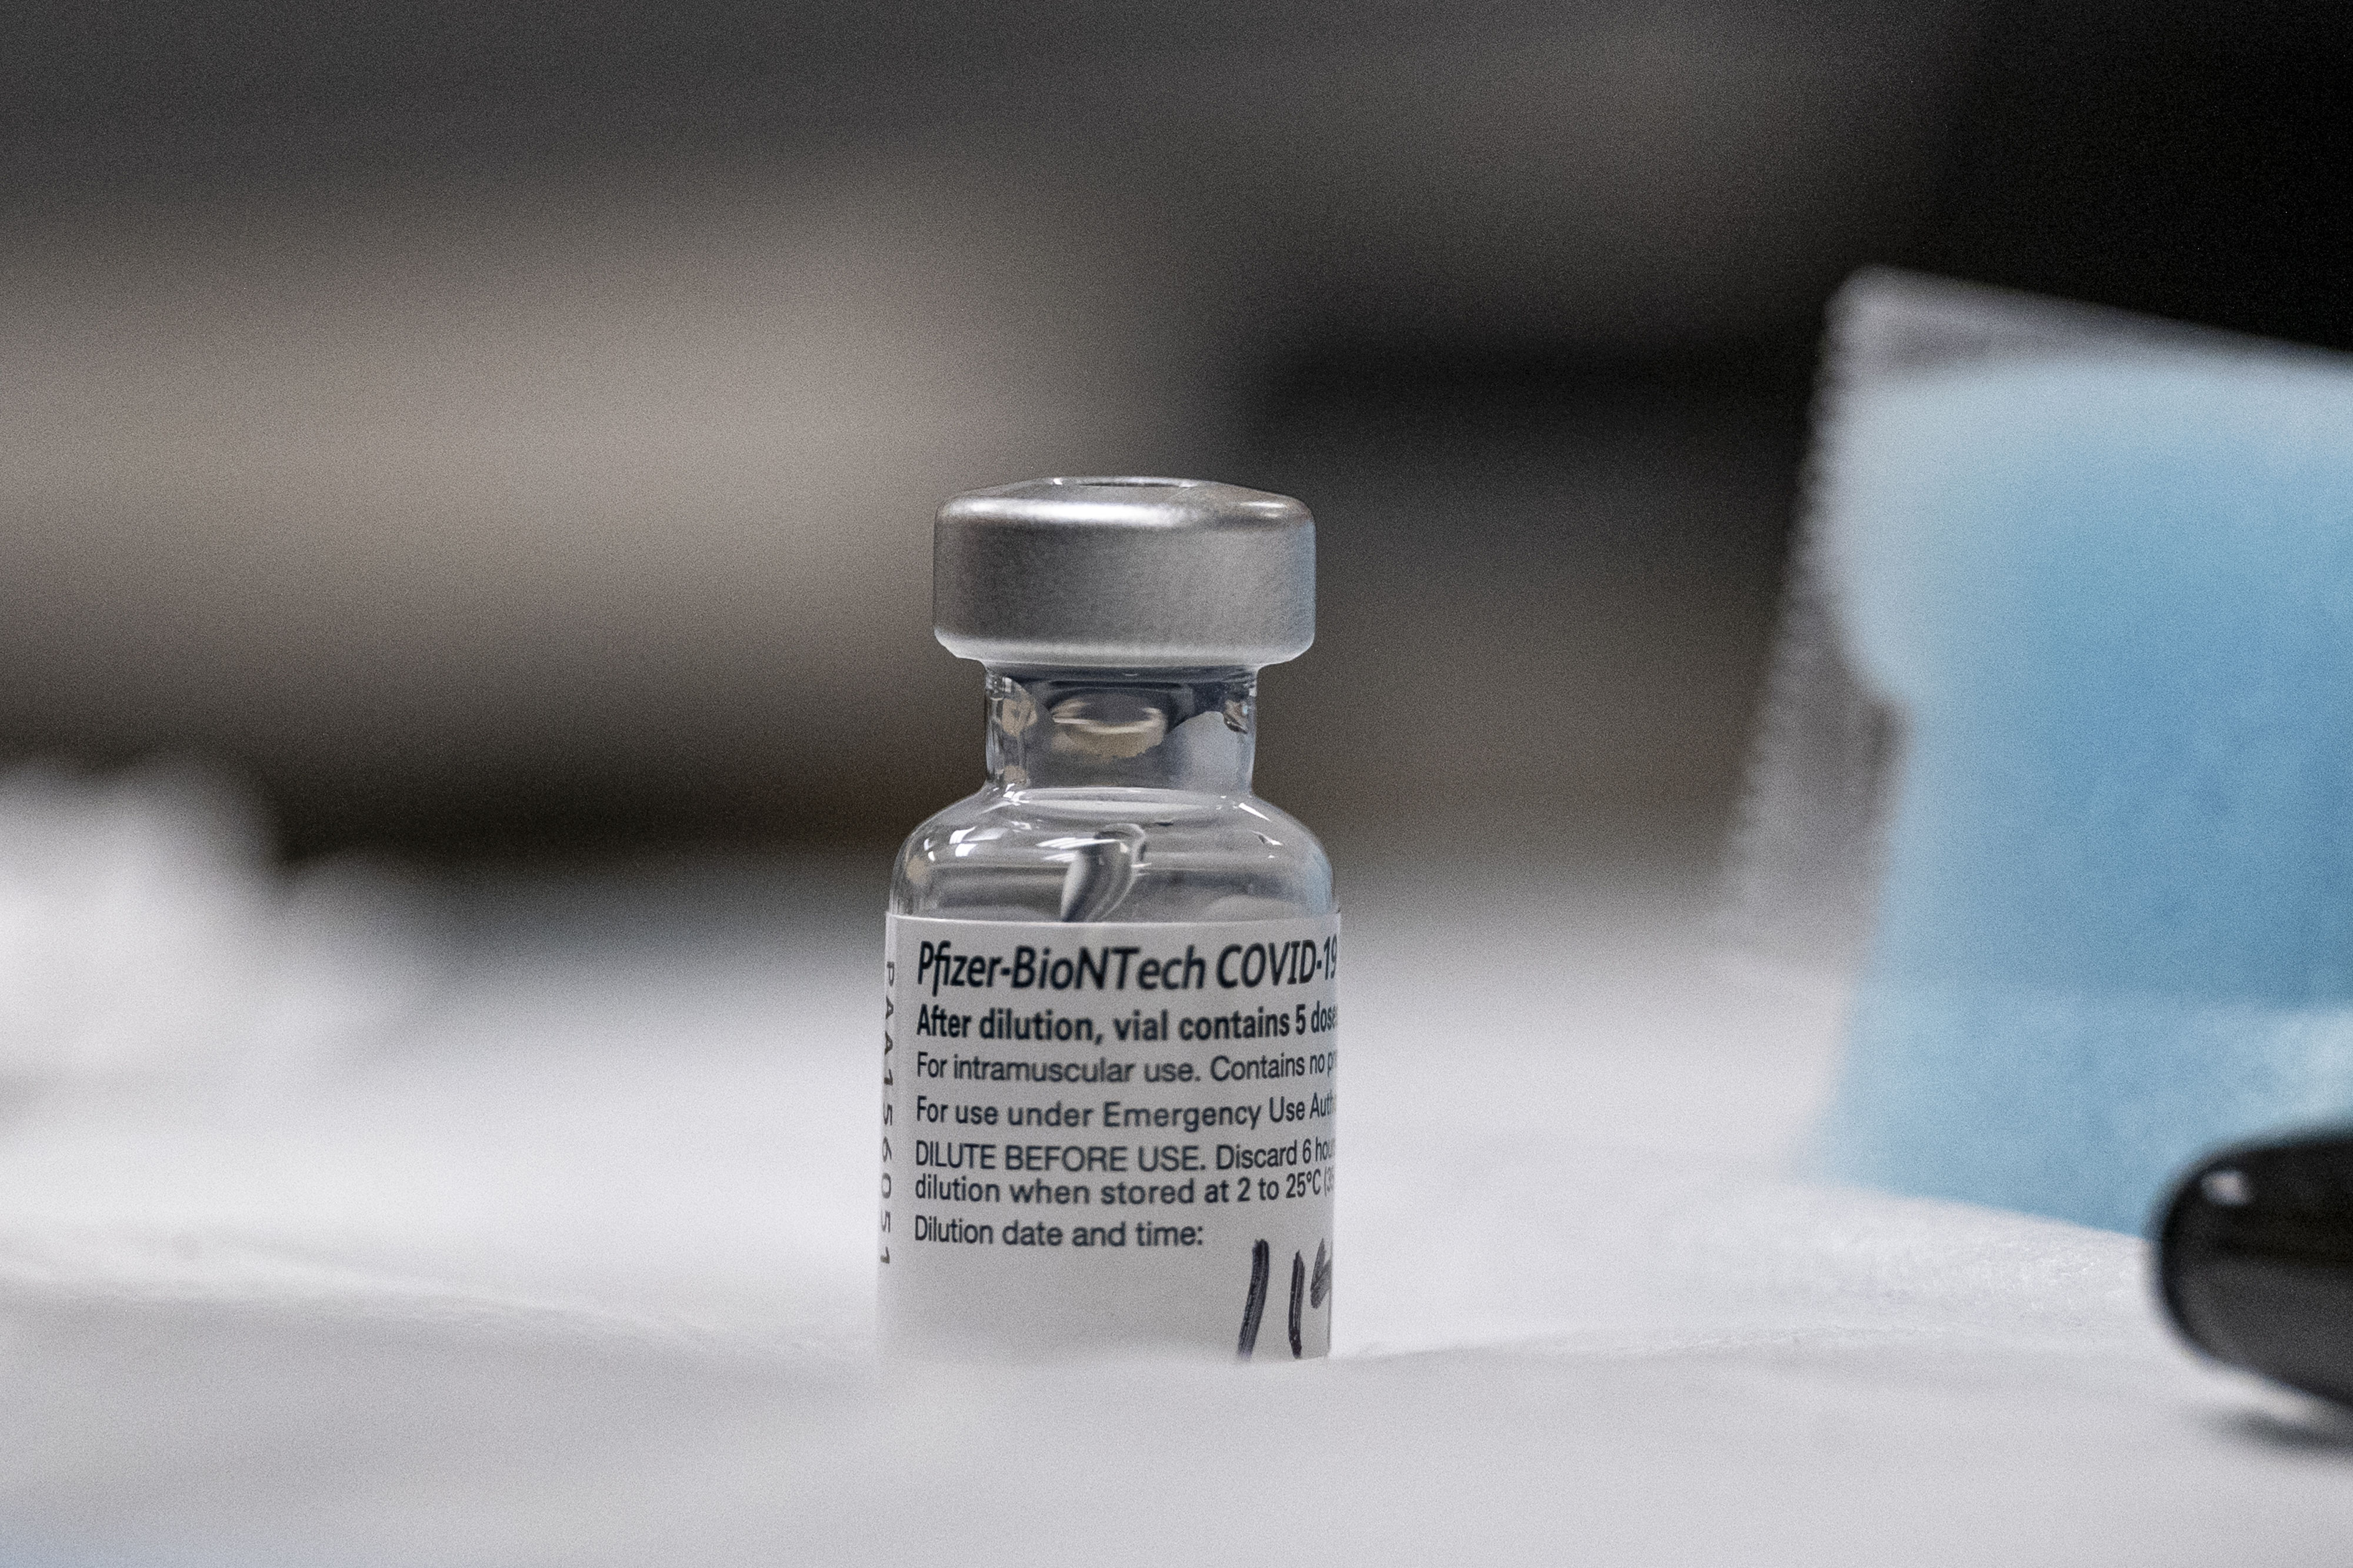 78-year-old SoCal woman dies after receiving the first dose of the COVID vaccine – CBS Los Angeles